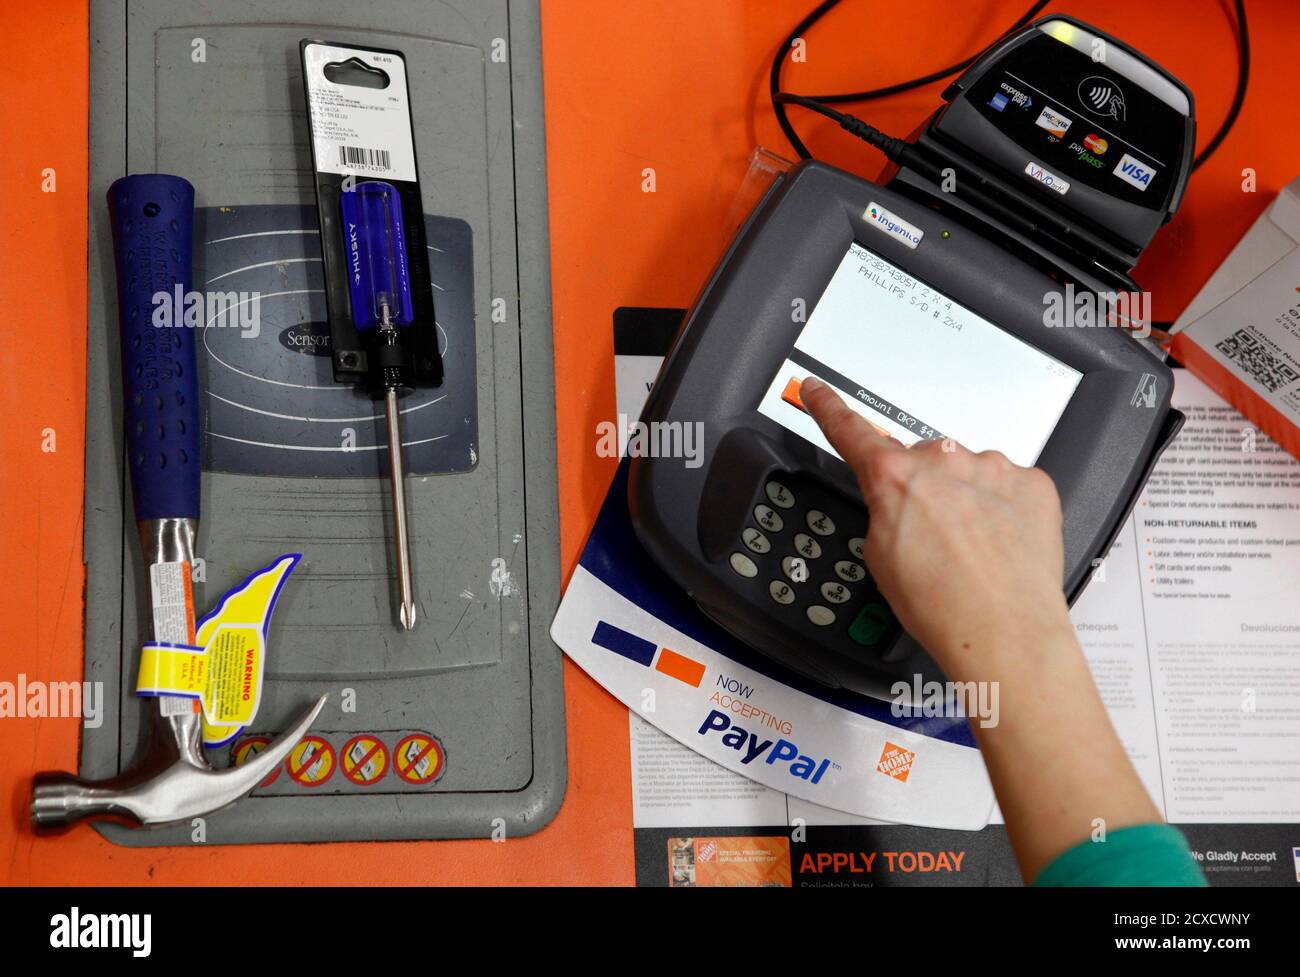 A public relations representative demonstrates how a PayPal customer can  pay for goods using their mobile phone number at a cashier station at a  Home Depot store in Daly City, California, February